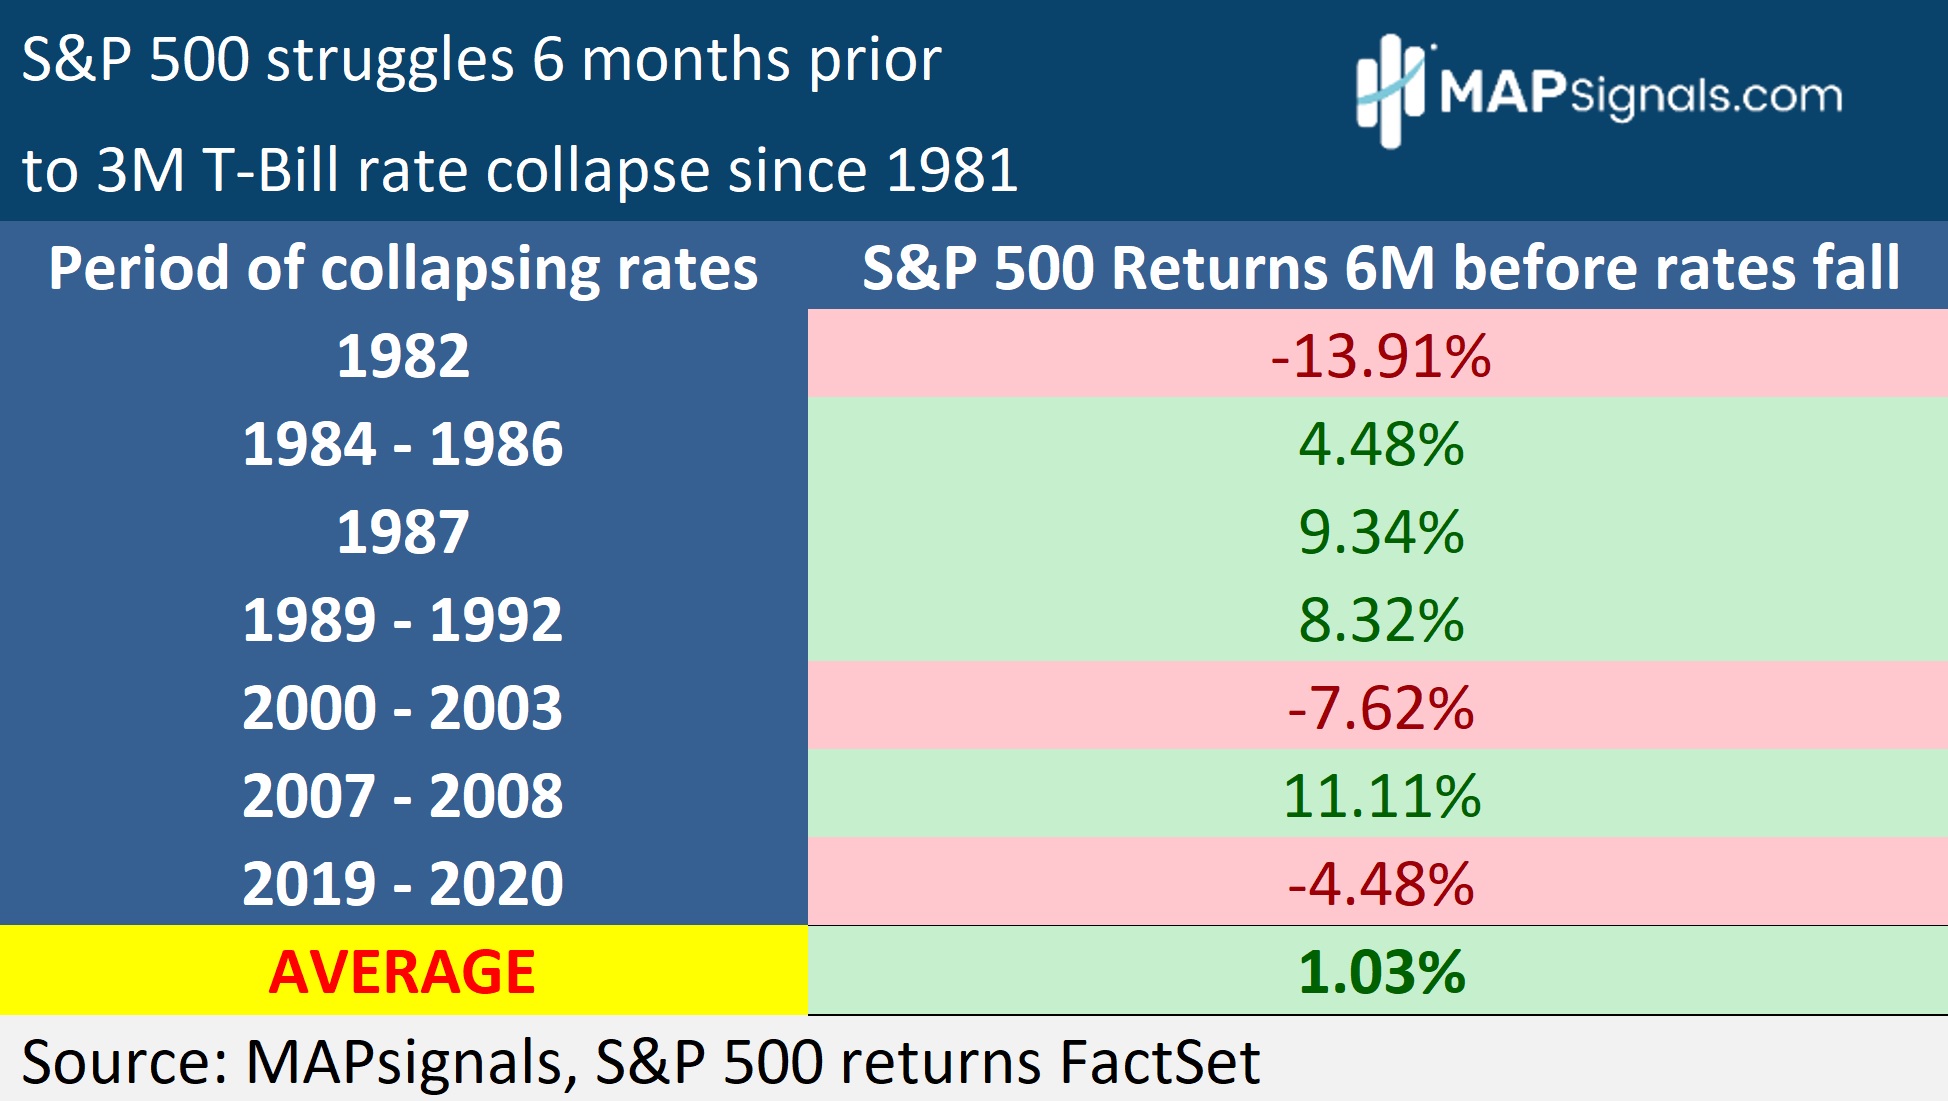 S&P 500 struggles 6 months prior to 3M T-Bill rate collapse since 1981 | MAPsignals